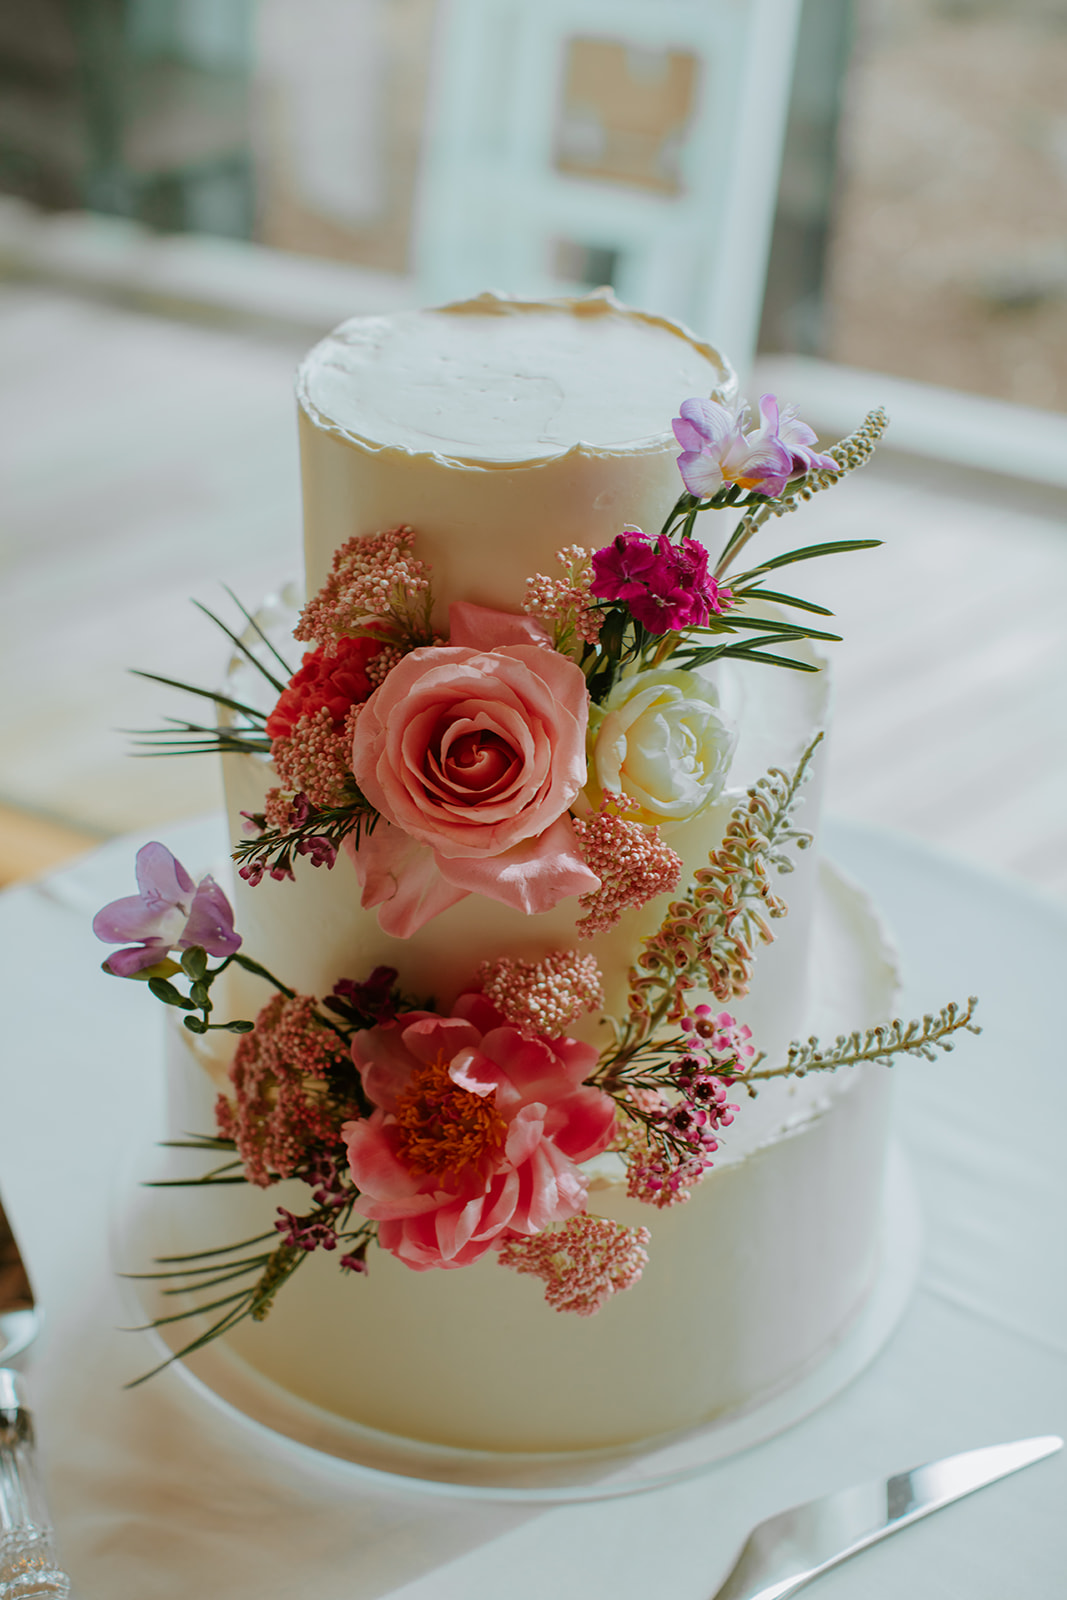 Crumb Cakery - Colorful Spring Wedding Cake with Fresh Flowers